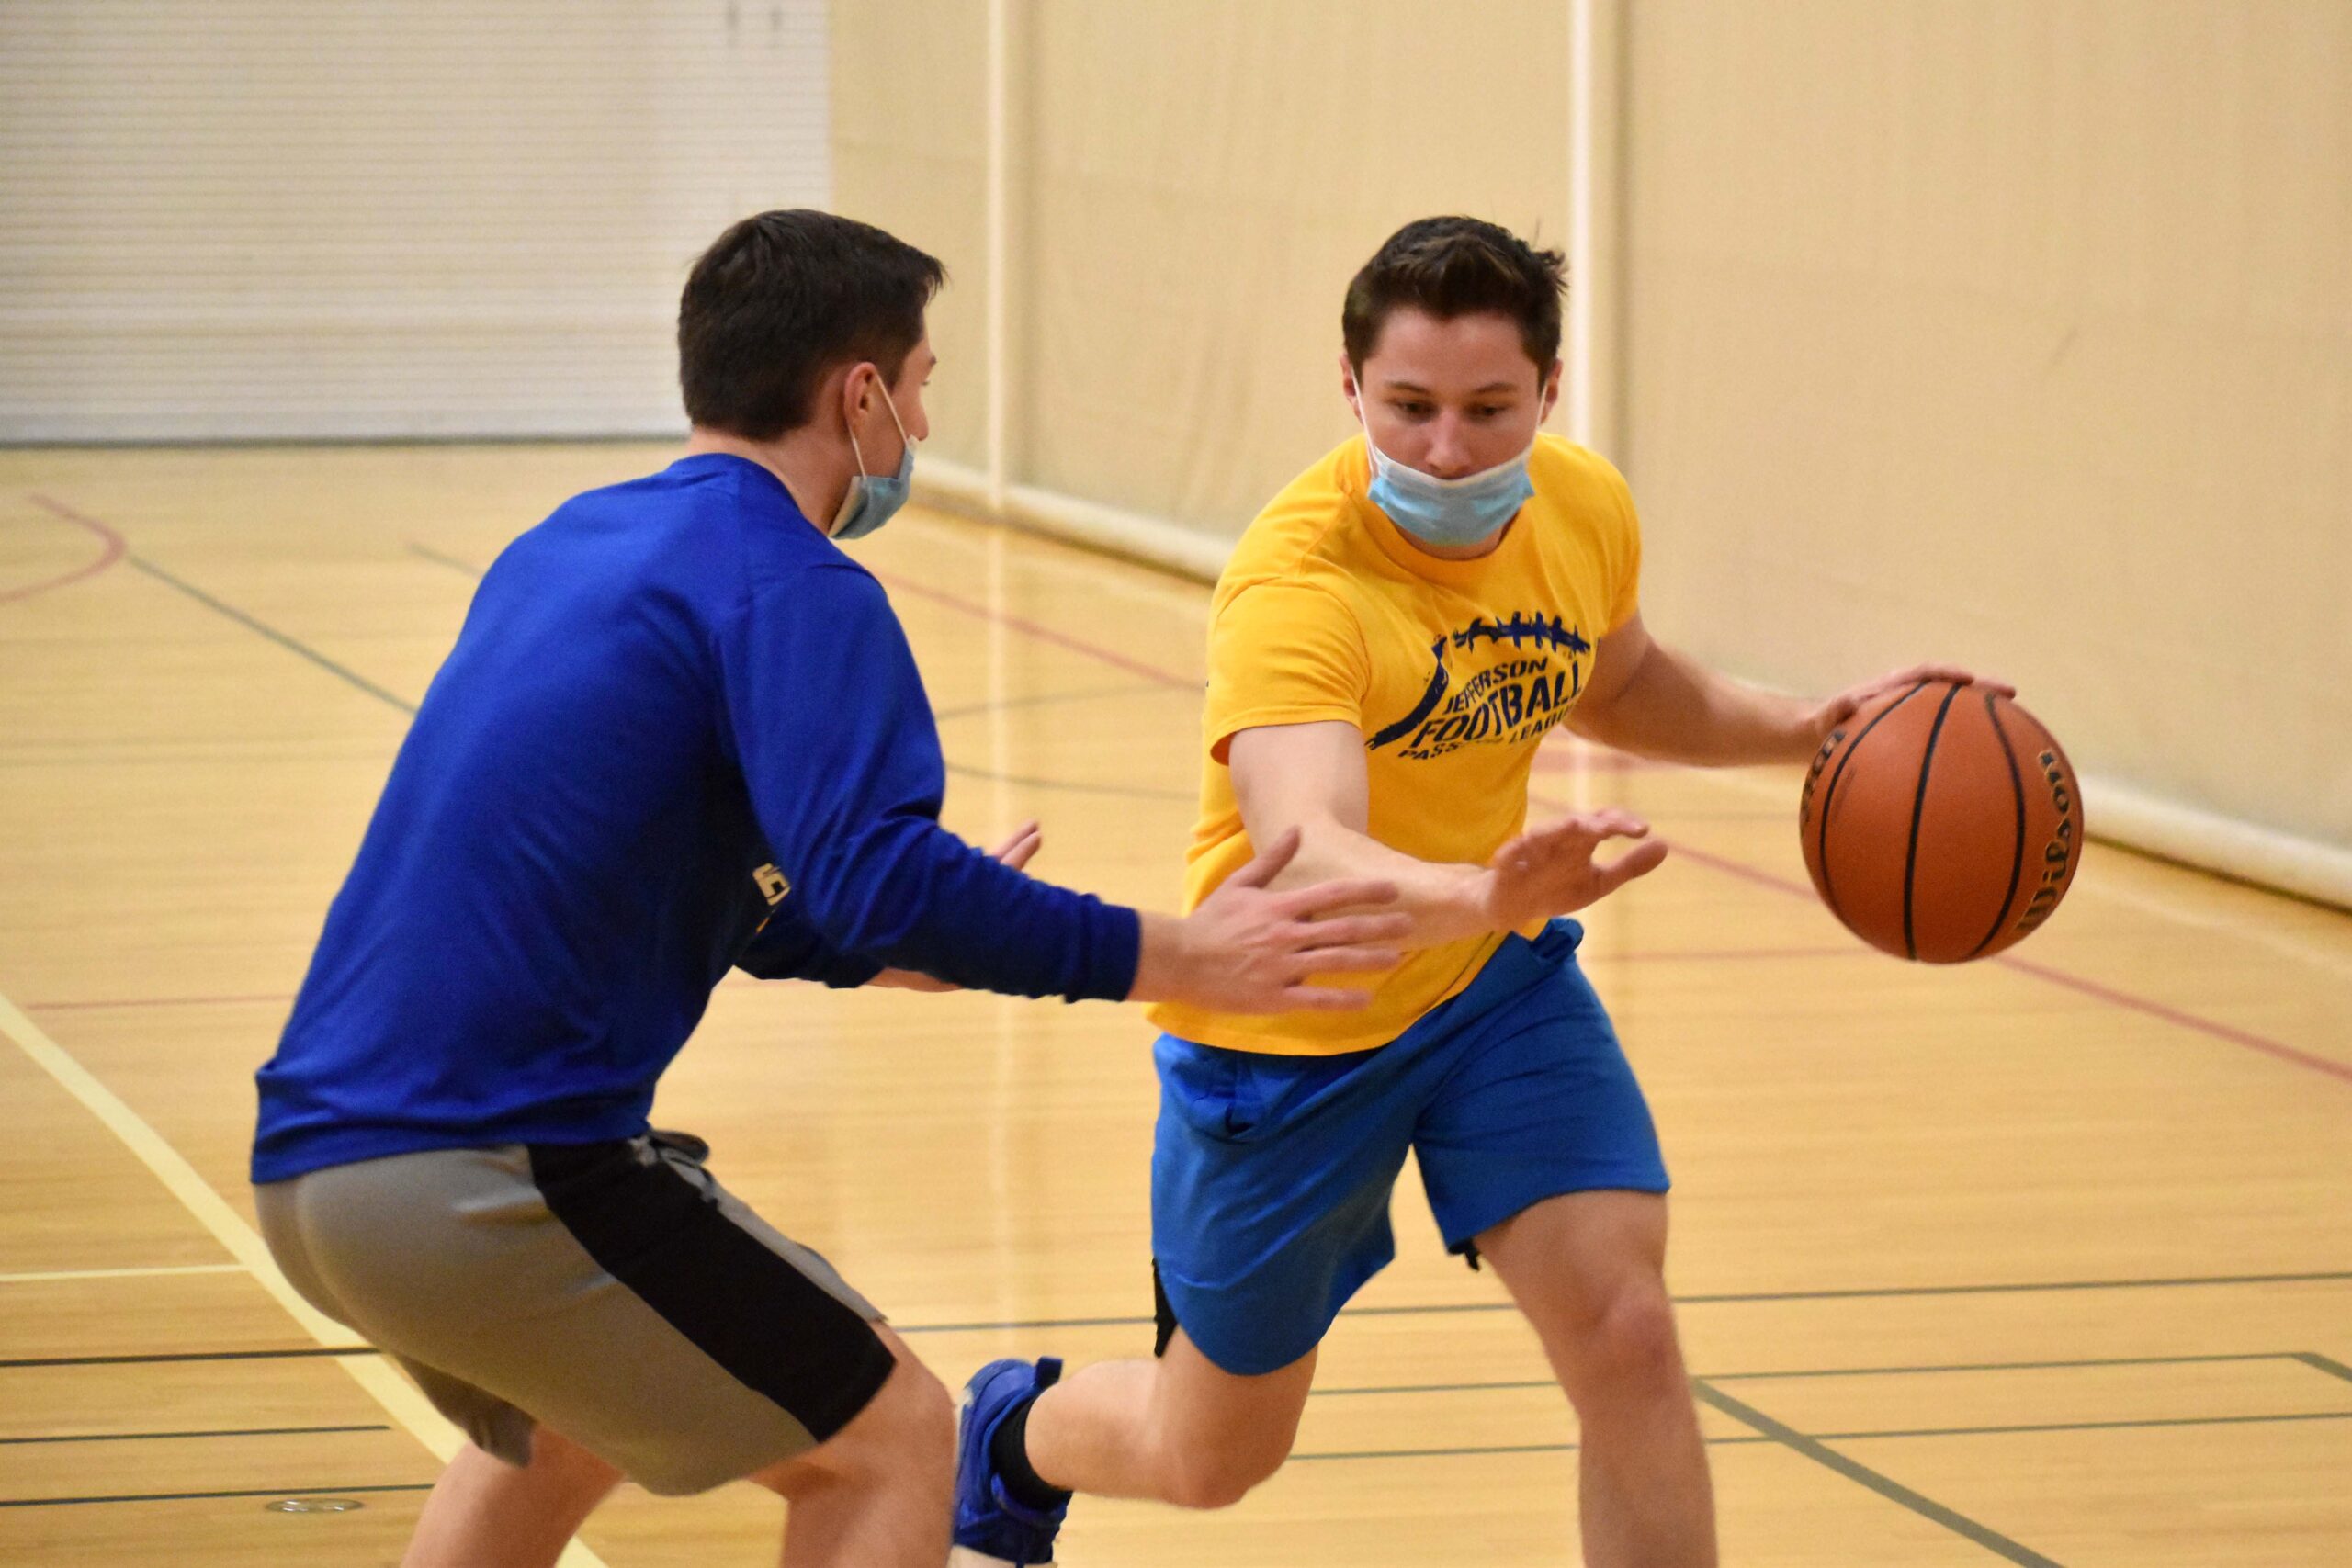 guy dribbling basketball with someone guarding them